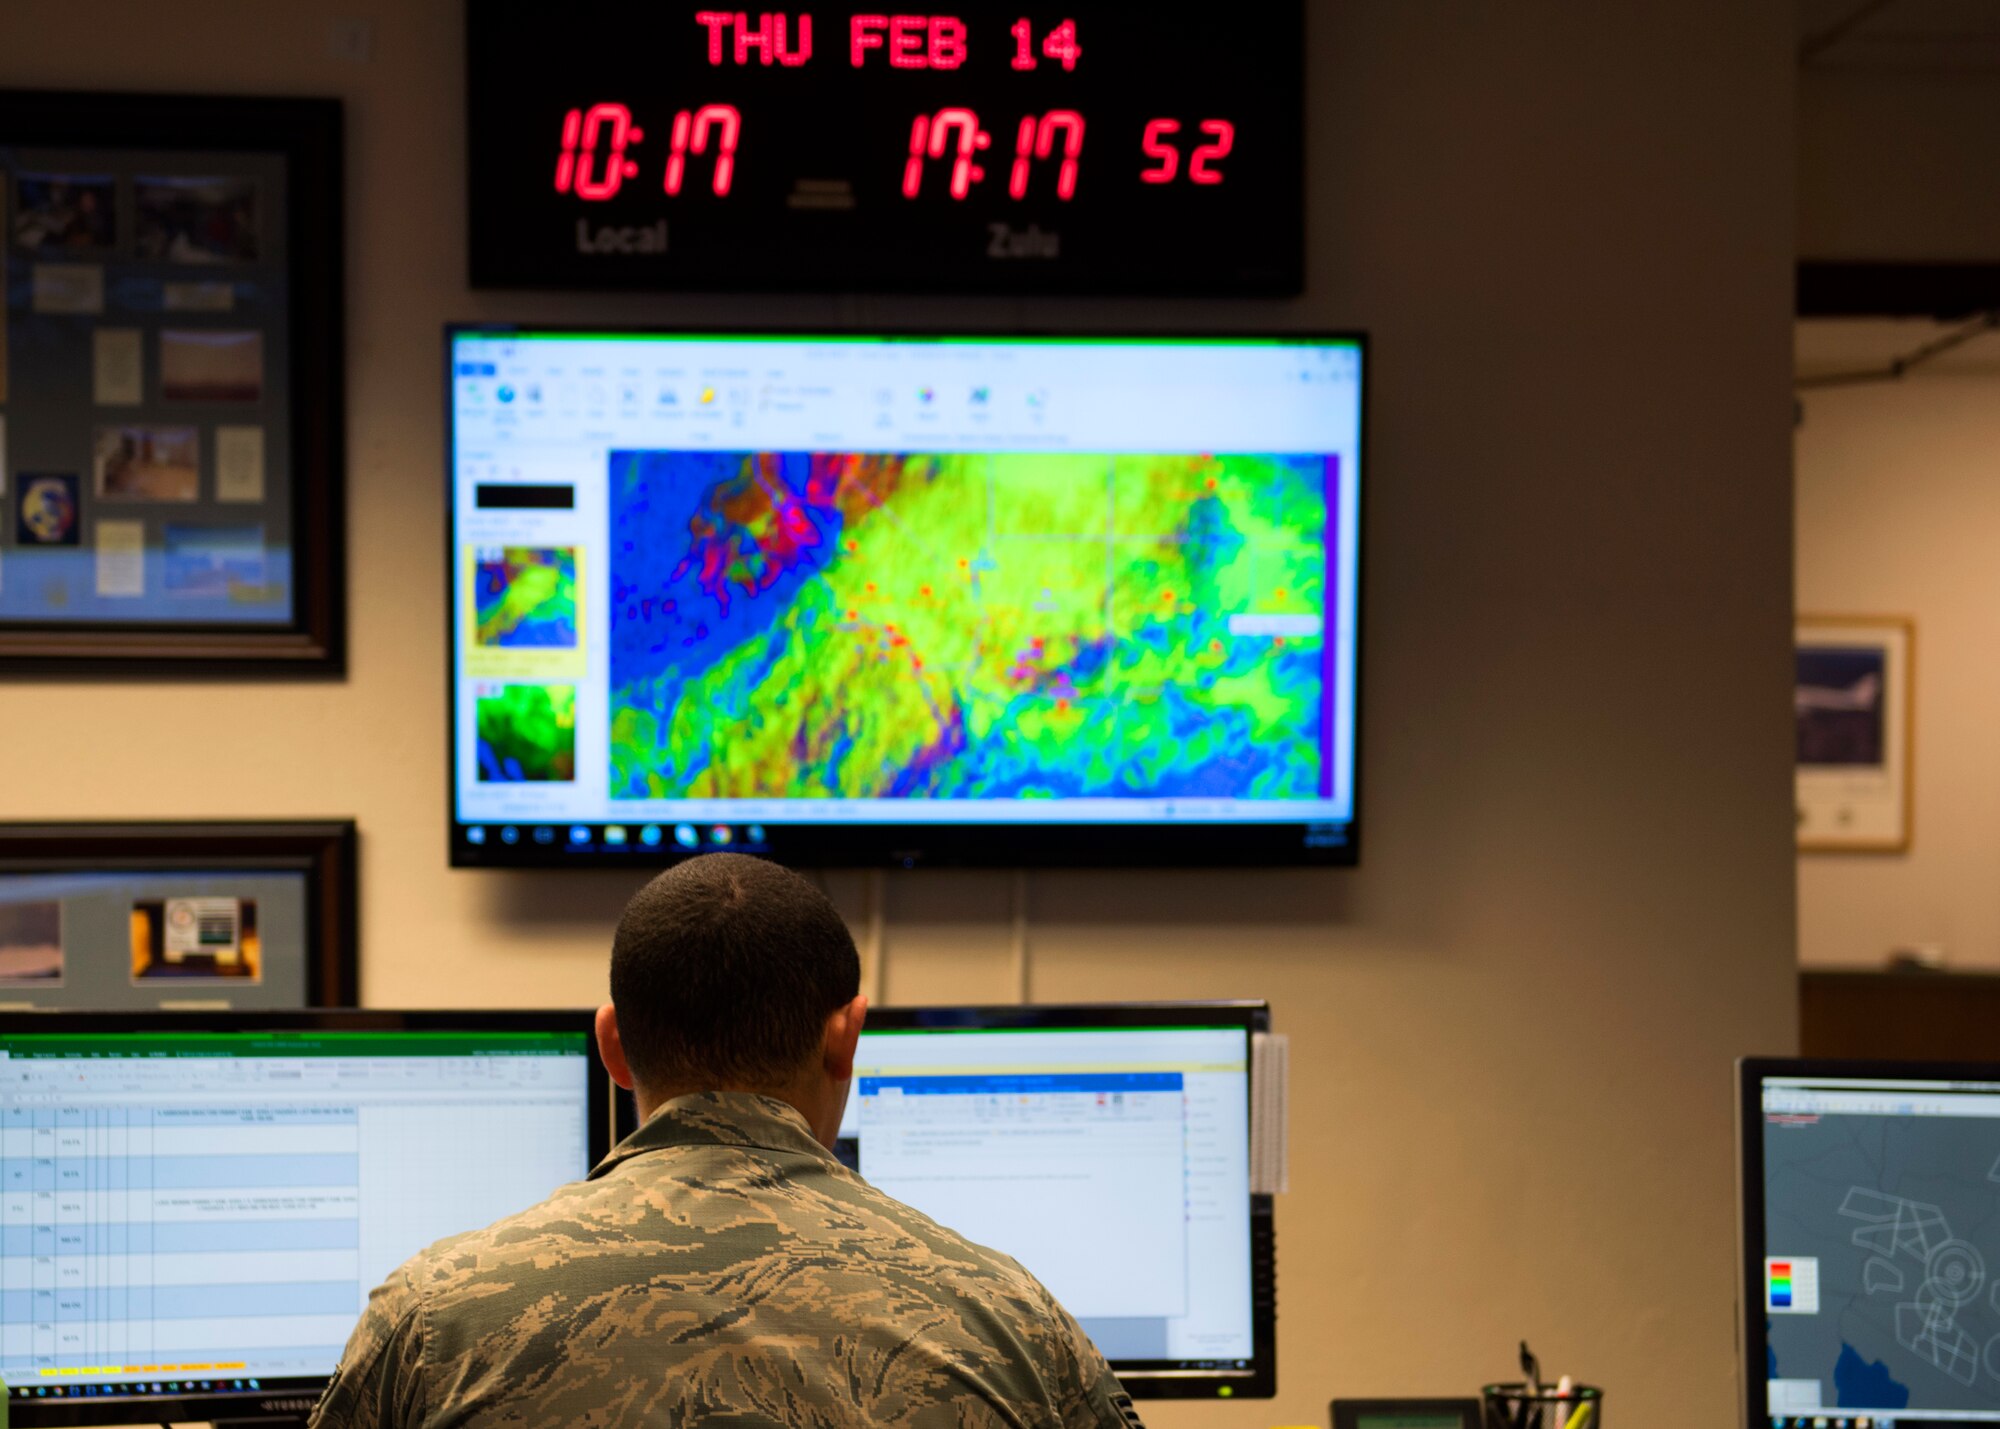 Senior Airman Christopher Smith, 56th Operations Support Squadron Weather Flight journeyman, reviews a forecast at Luke Air Force Base, Ariz., Feb. 14, 2019.